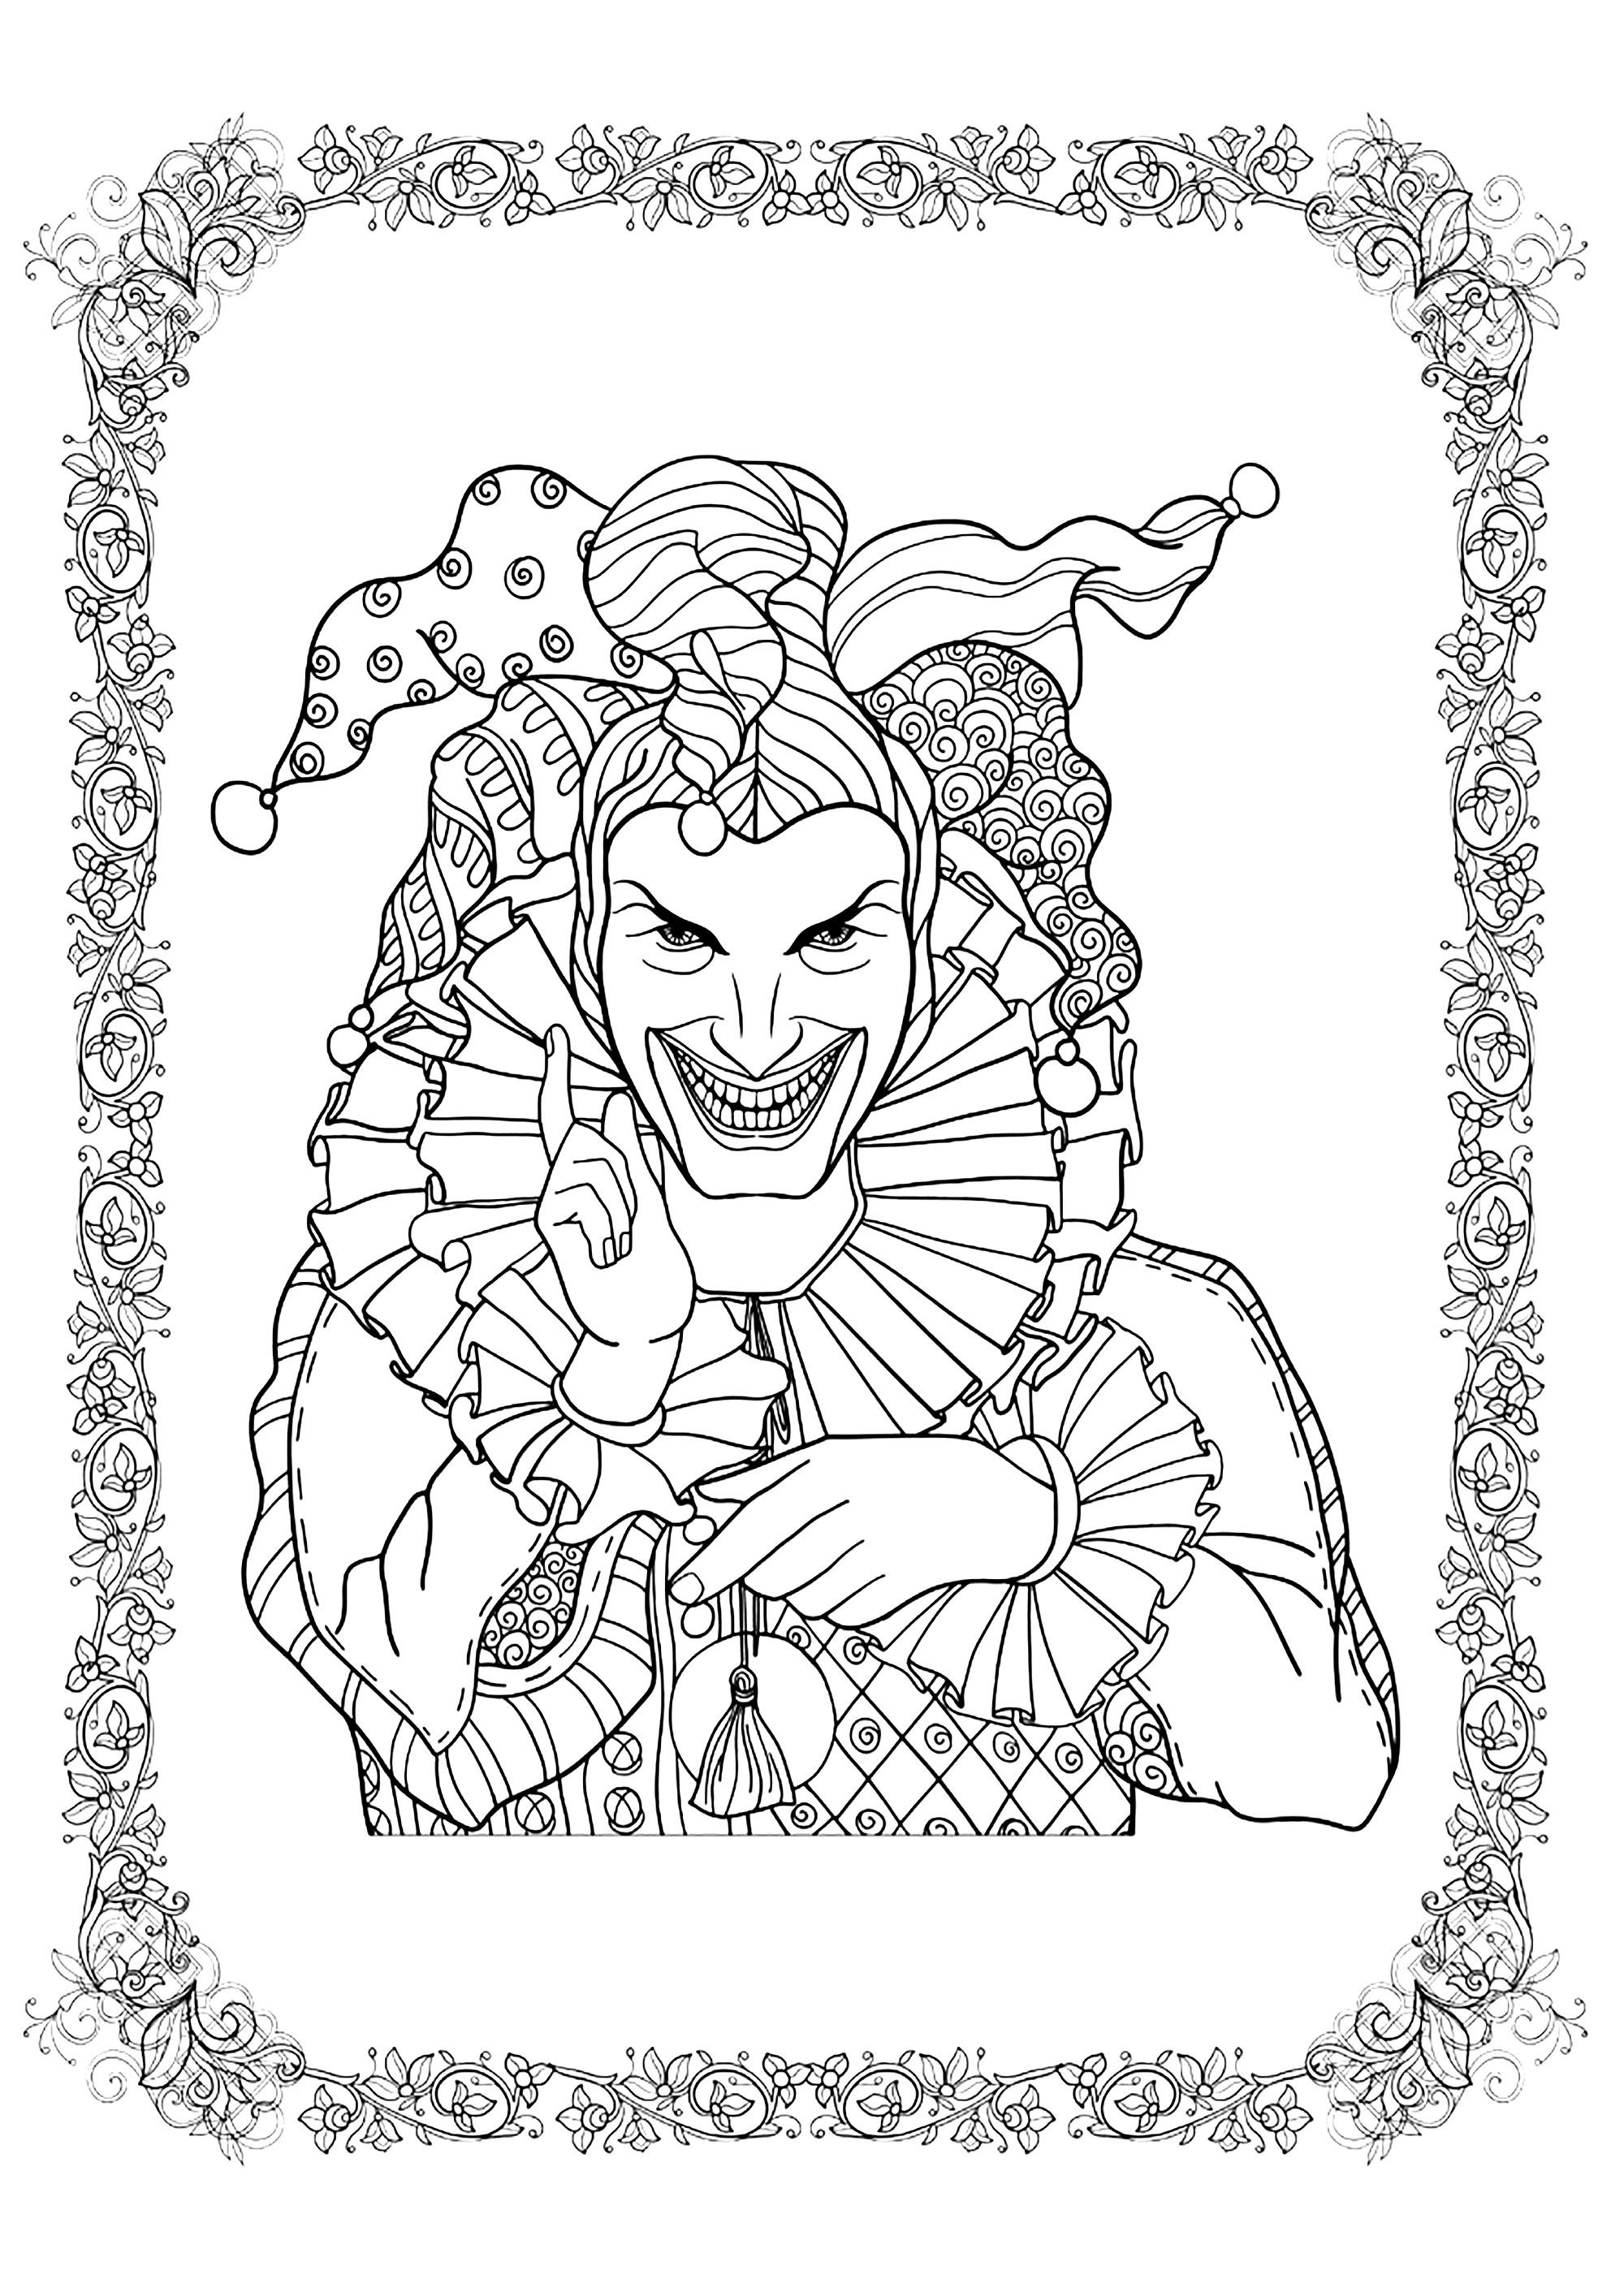 The Joker goes all out for Halloween. Color the intricately patterned frame, too, Source : 123rf   Artist : Helenlane